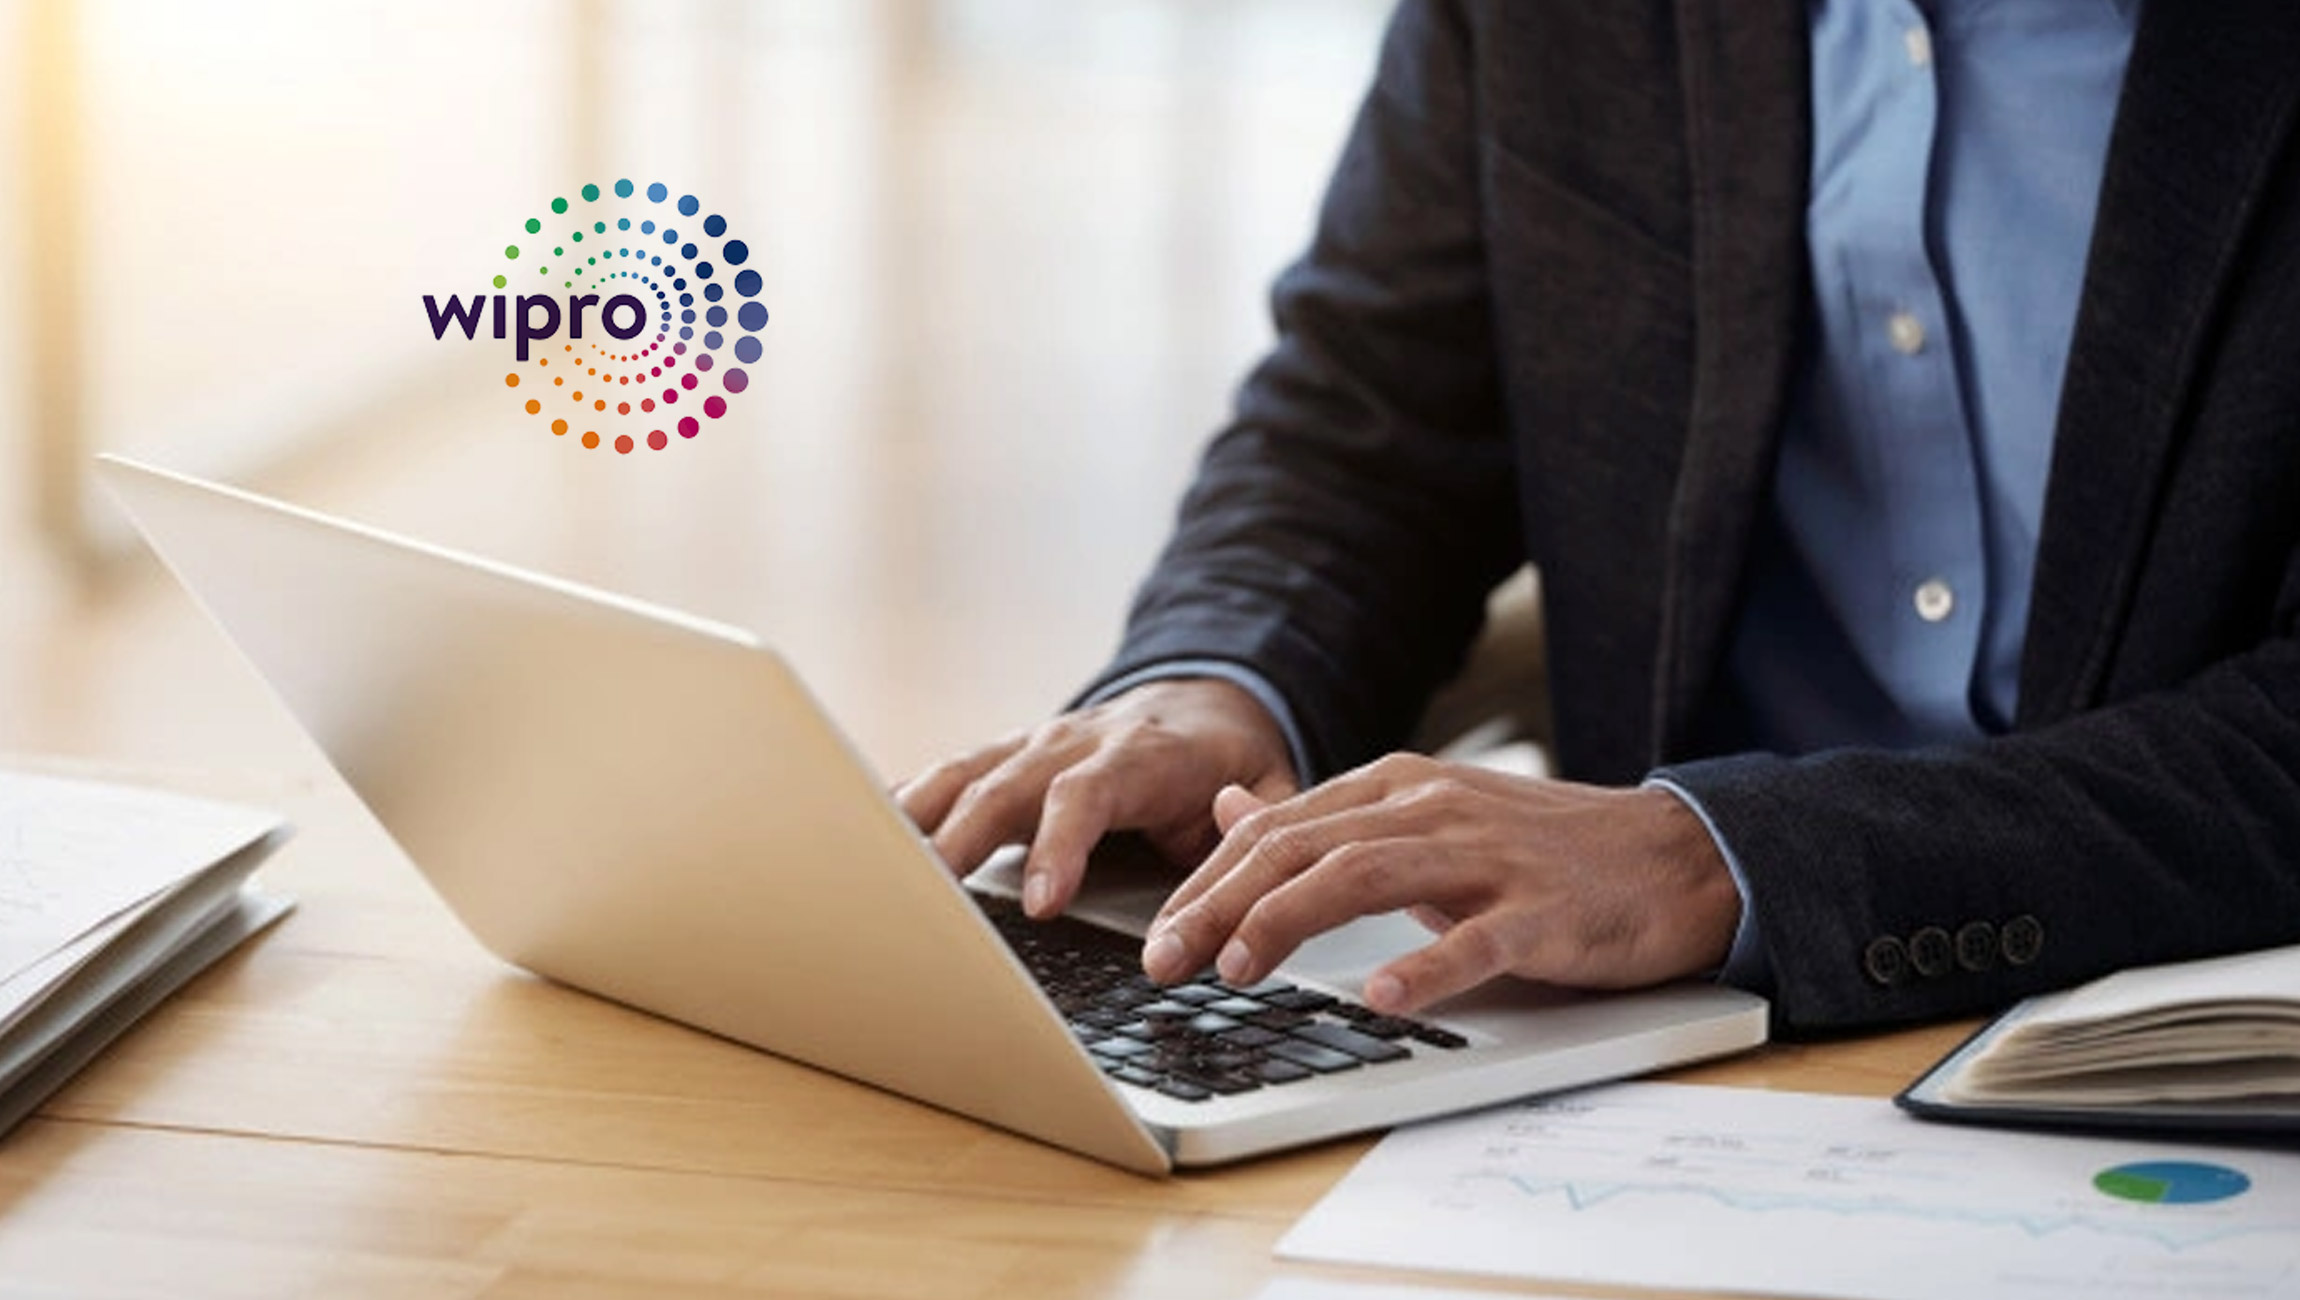 Wipro Named as a ‘Leader’ in Data Management Services by Independent Research Firm